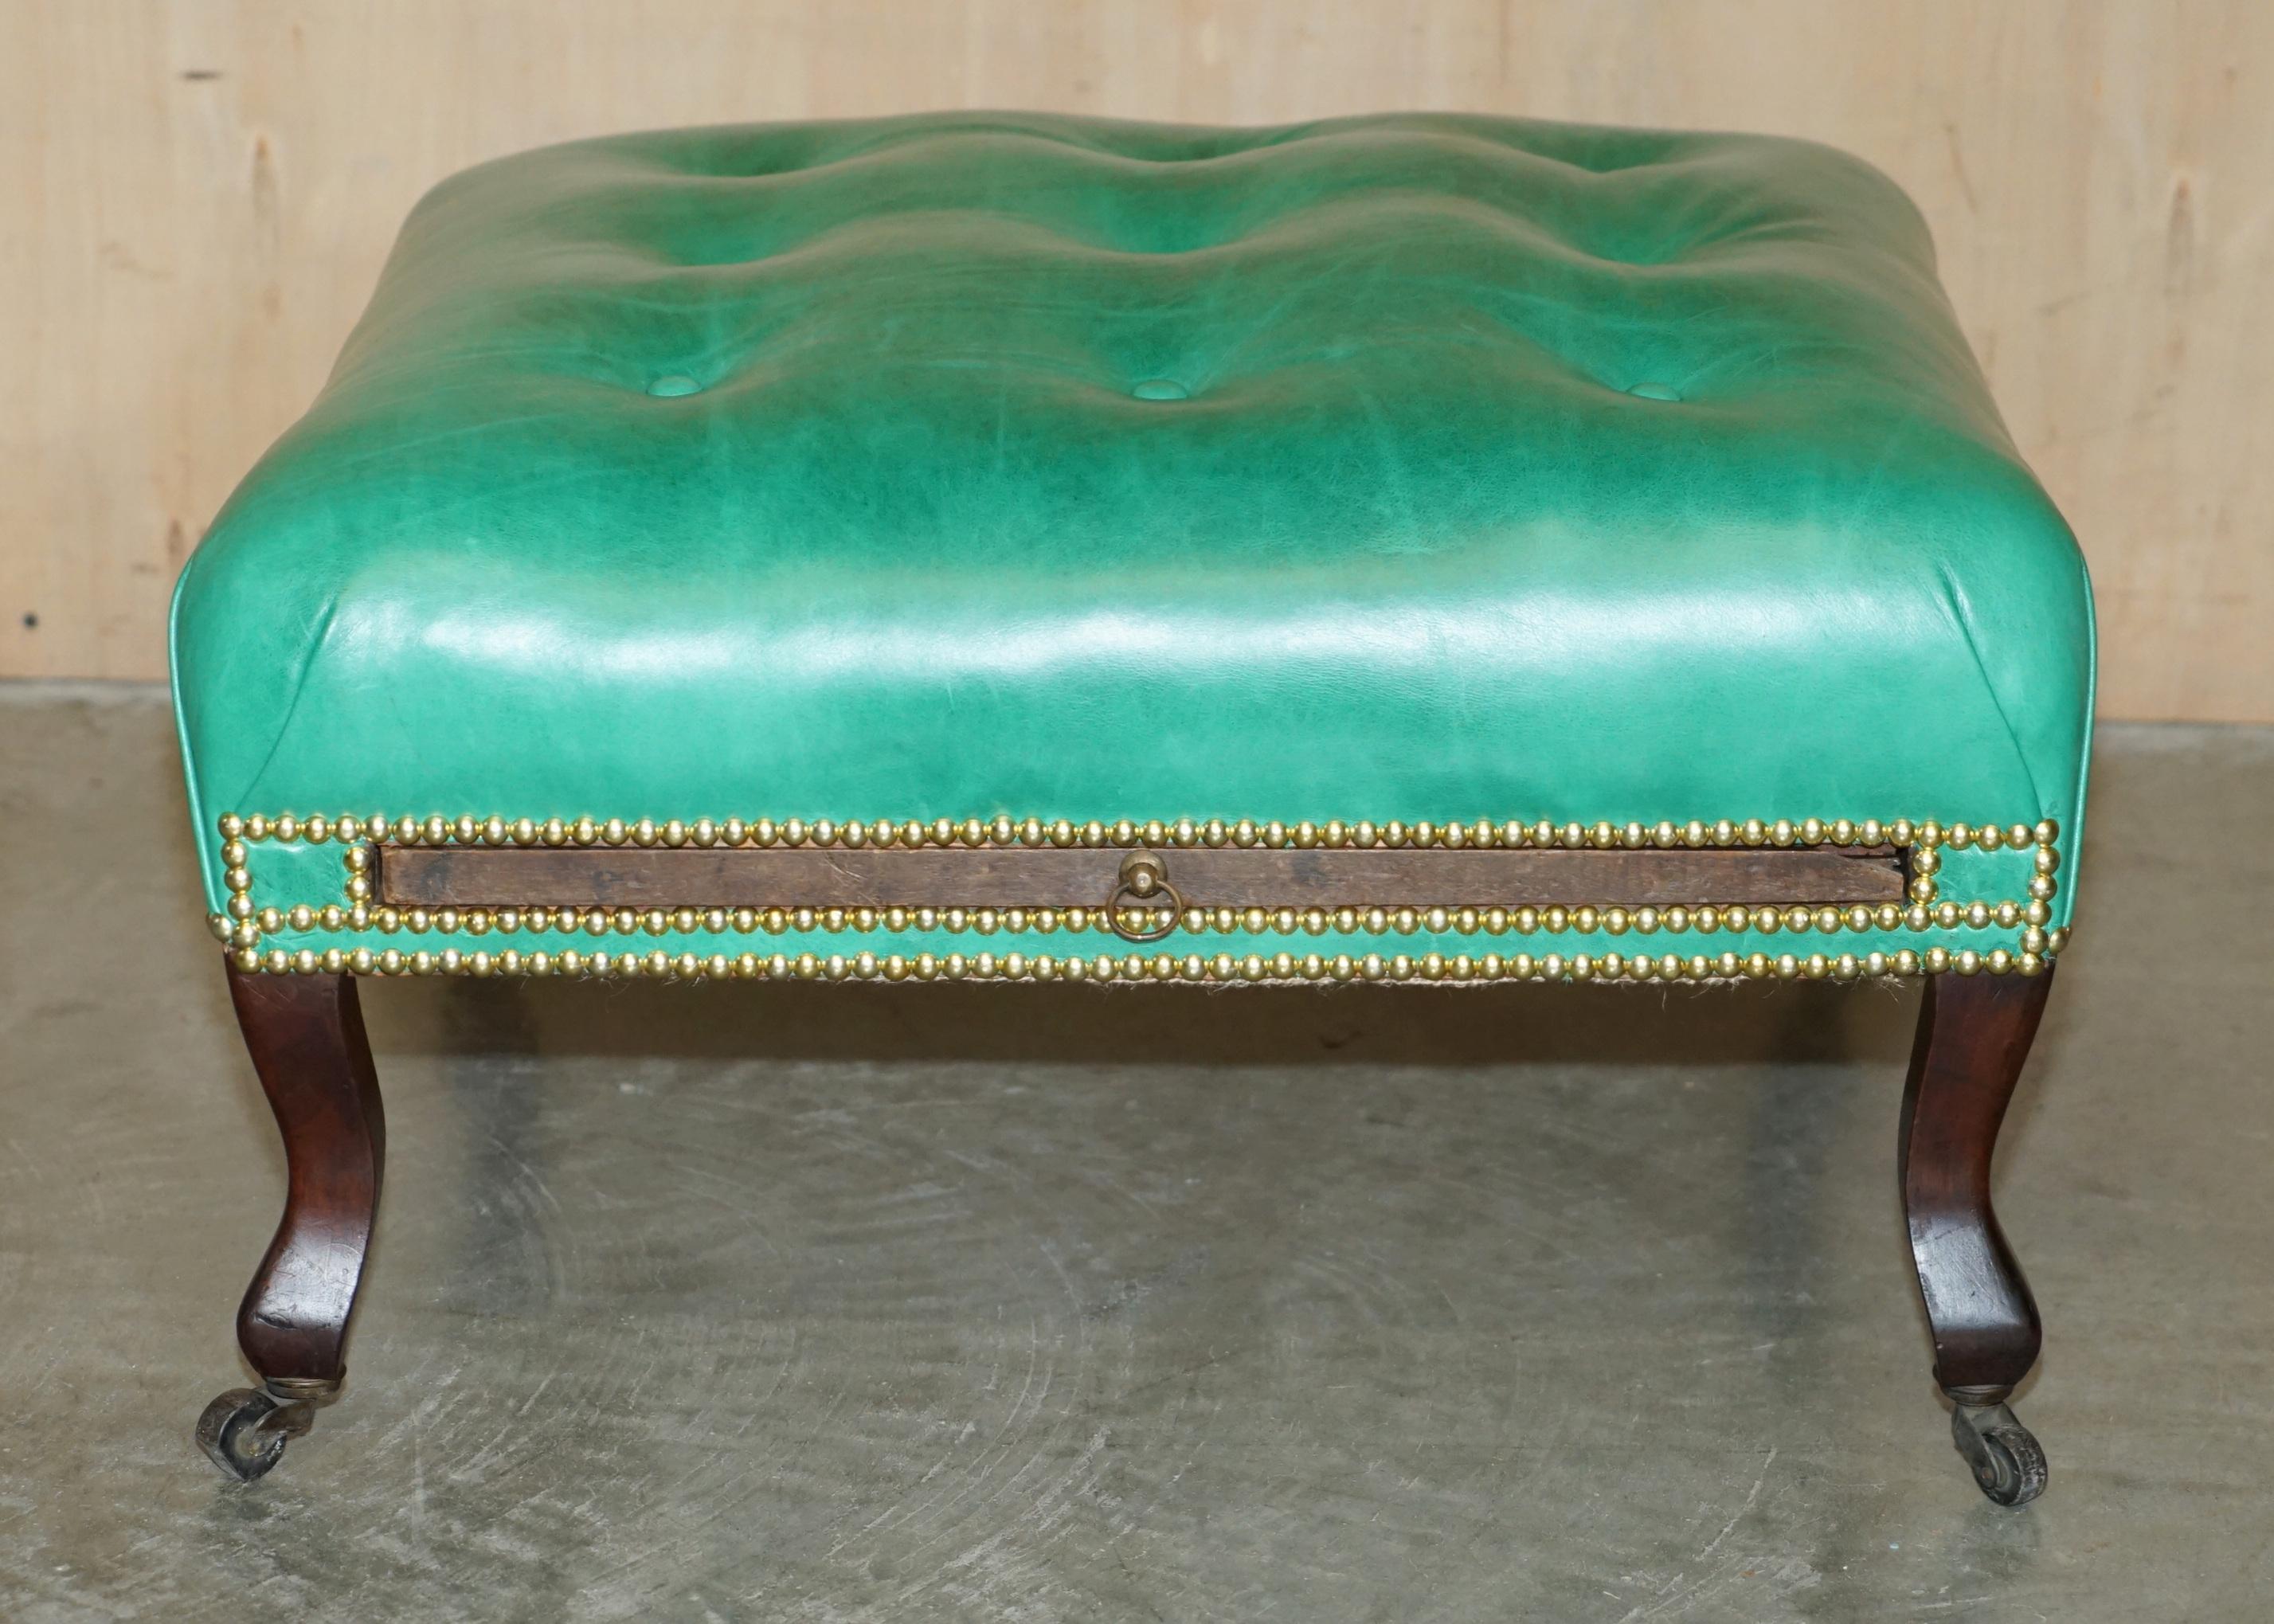 Hand-Crafted RARE ANTIQUE GEORGIAN 1760 CHESTERFIELD LEATHER FOOTSTOOL WiTH SLIP SERVING TRAY For Sale